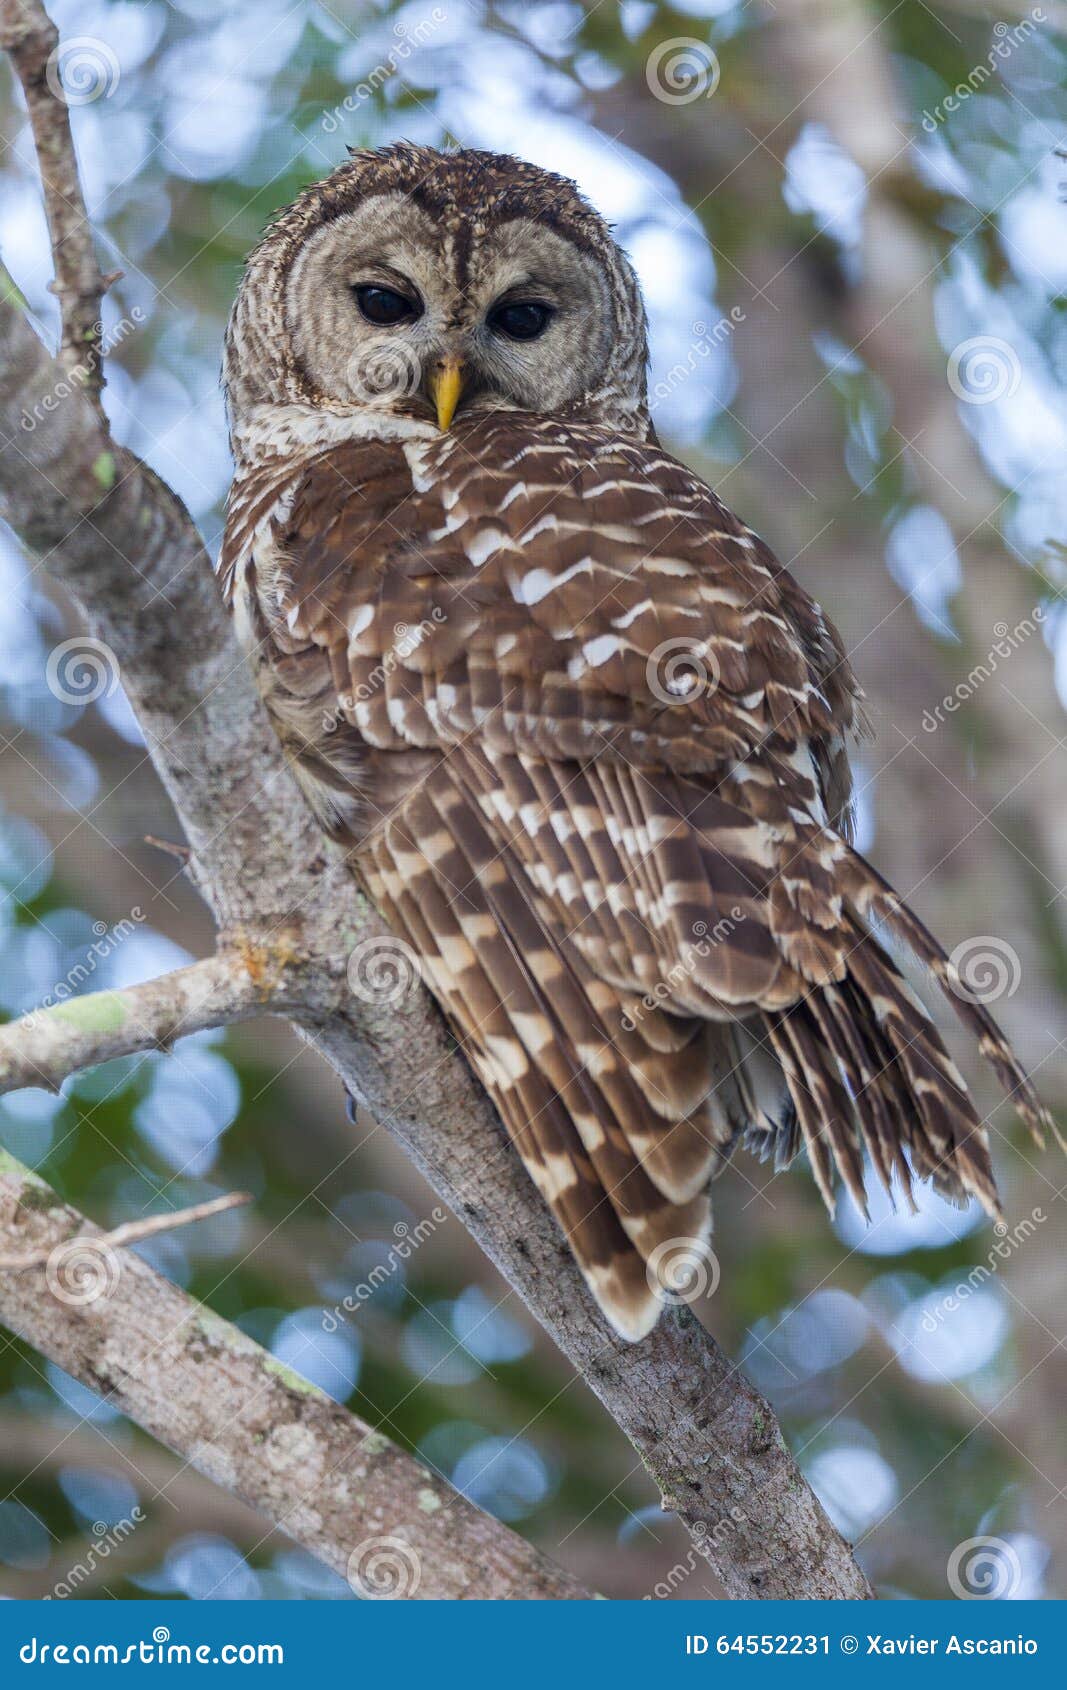 barred owl perched on branch and watching intently